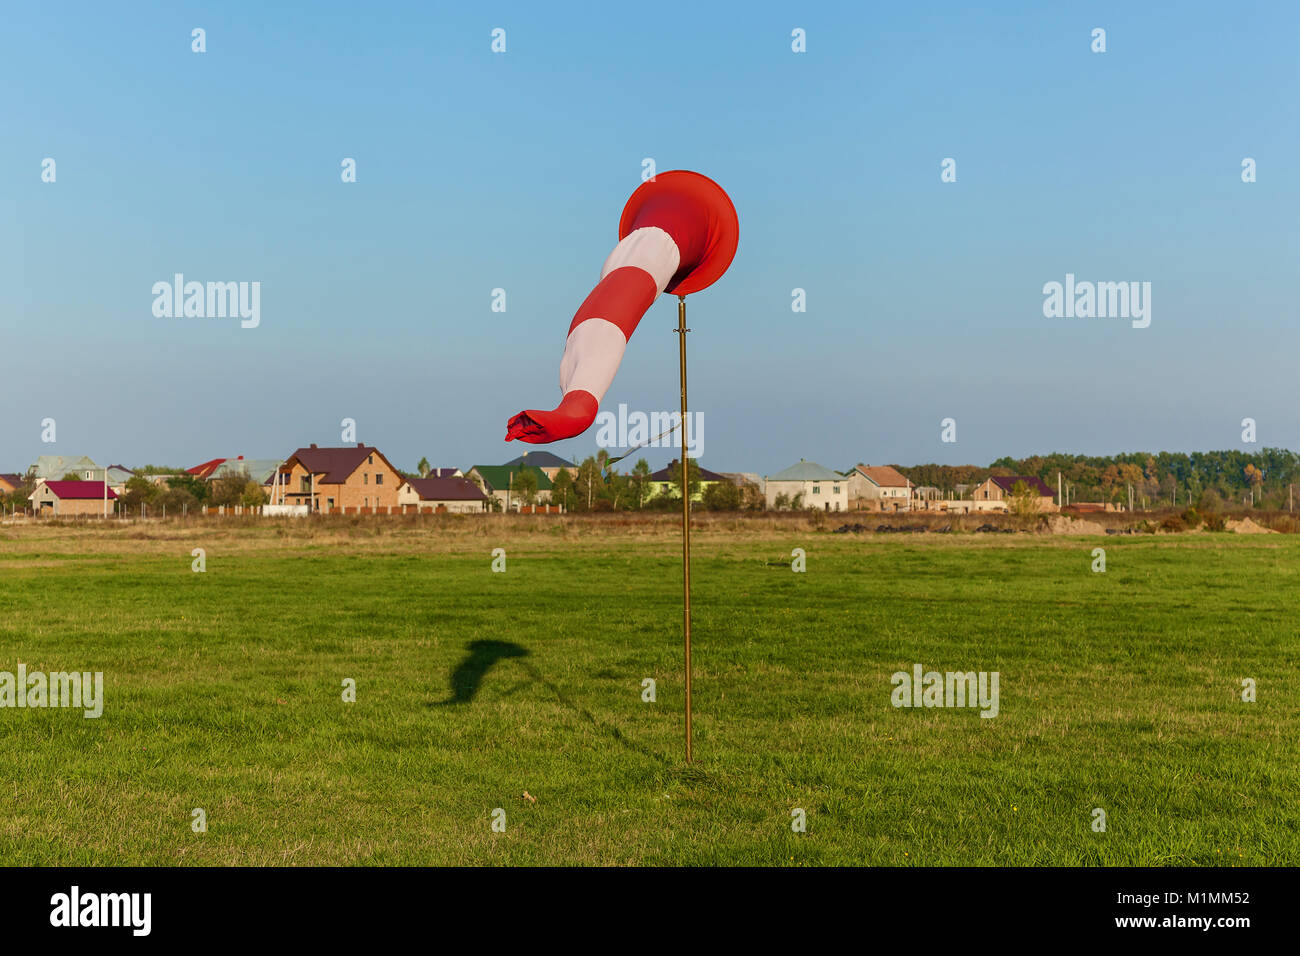 Cone on the runway on the background of grass and houses. Cone on the runway. Stock Photo